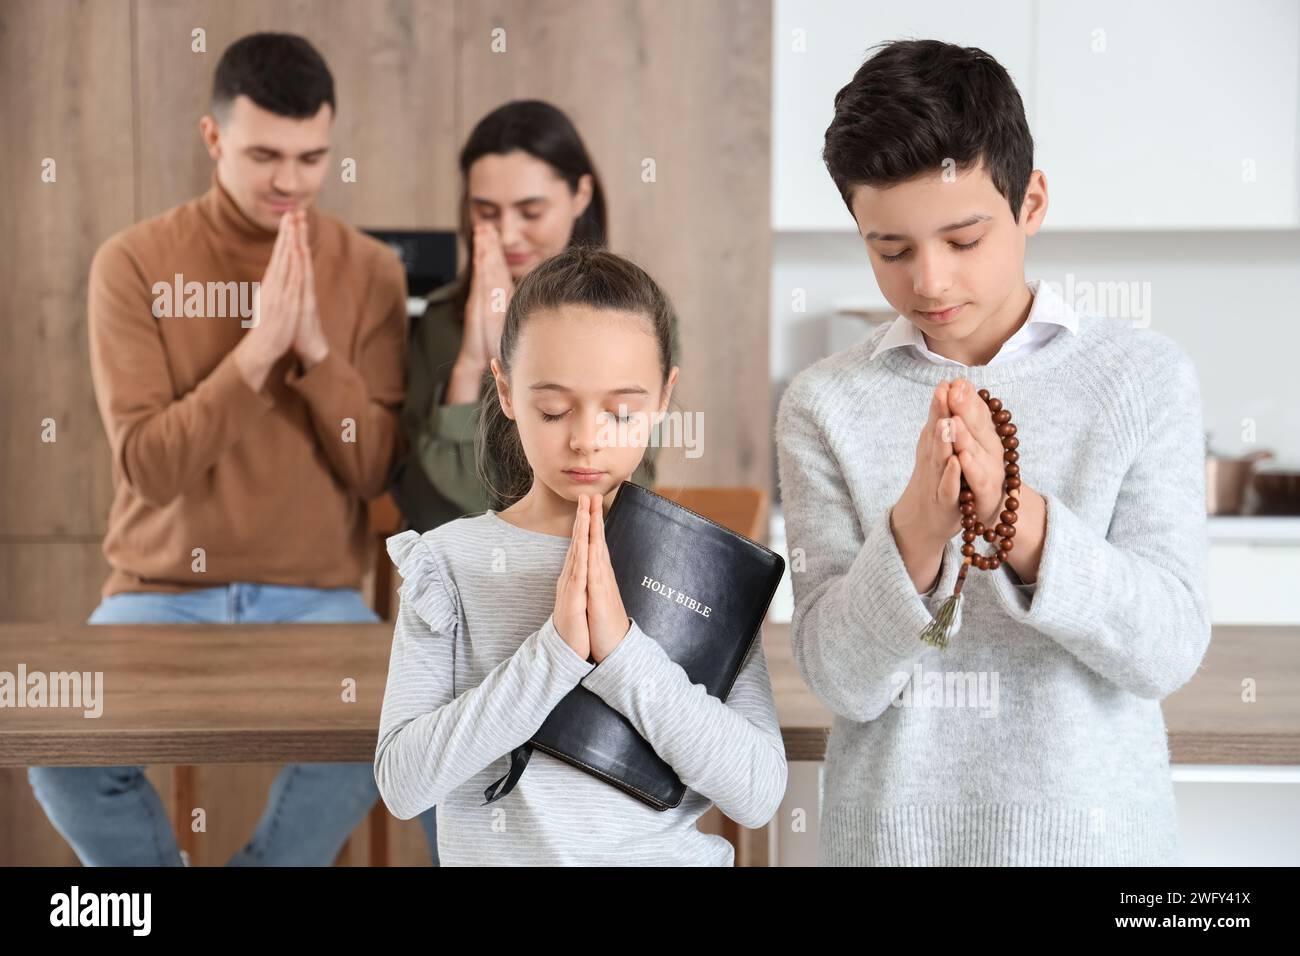 Little children with Holy Bible and beads praying in kitchen Stock Photo